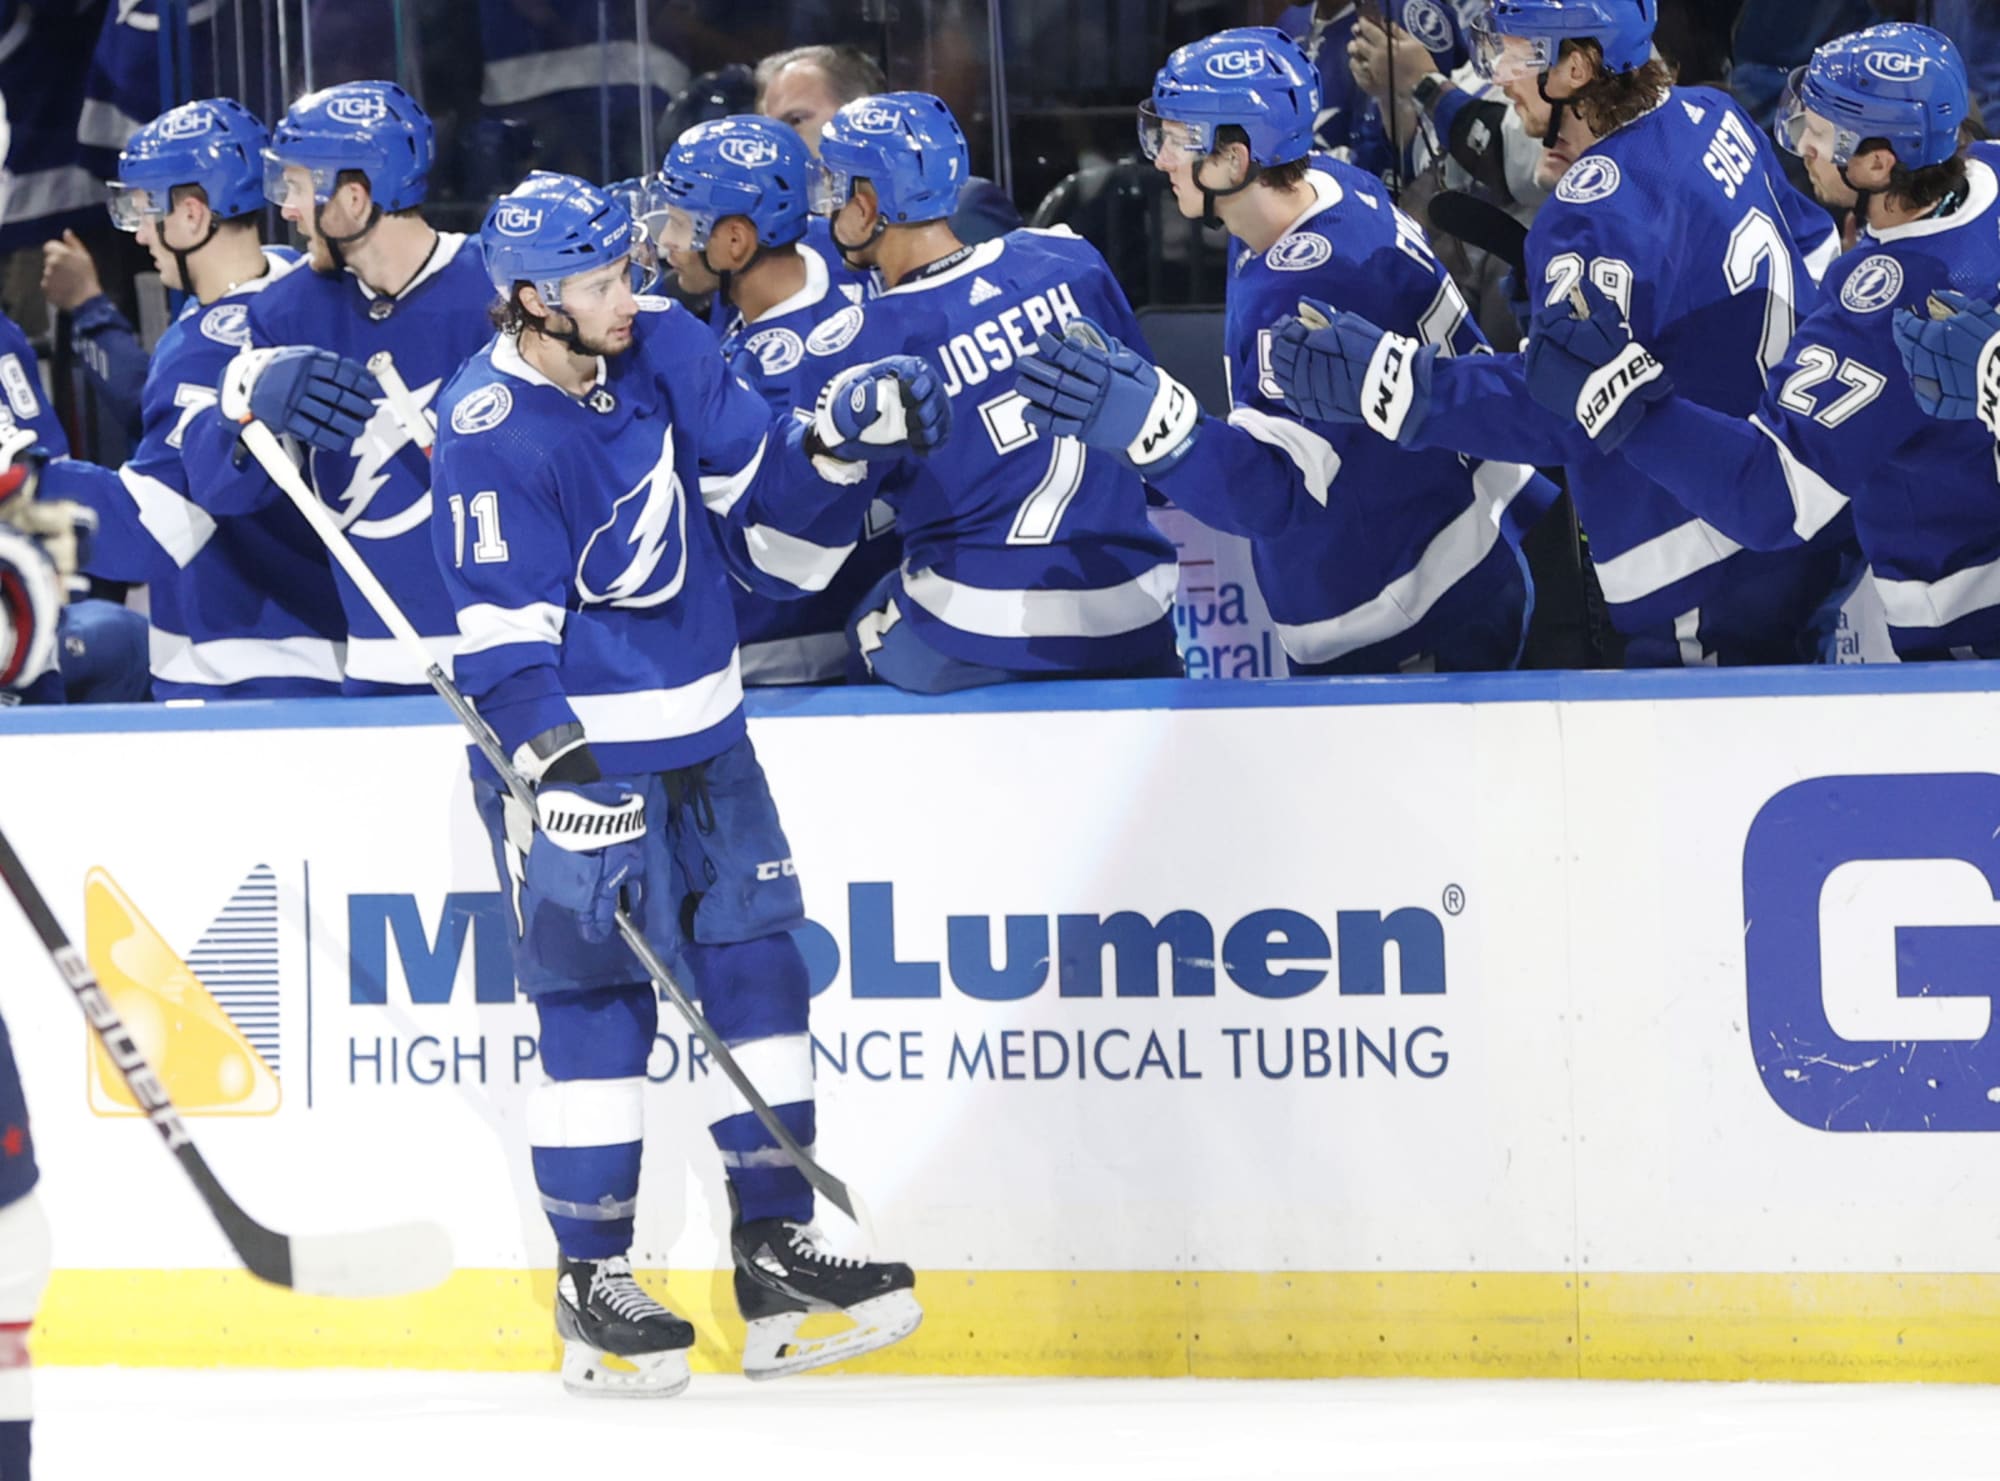 5 Takeaways from the Lightning's 3-2 Win Over Washington